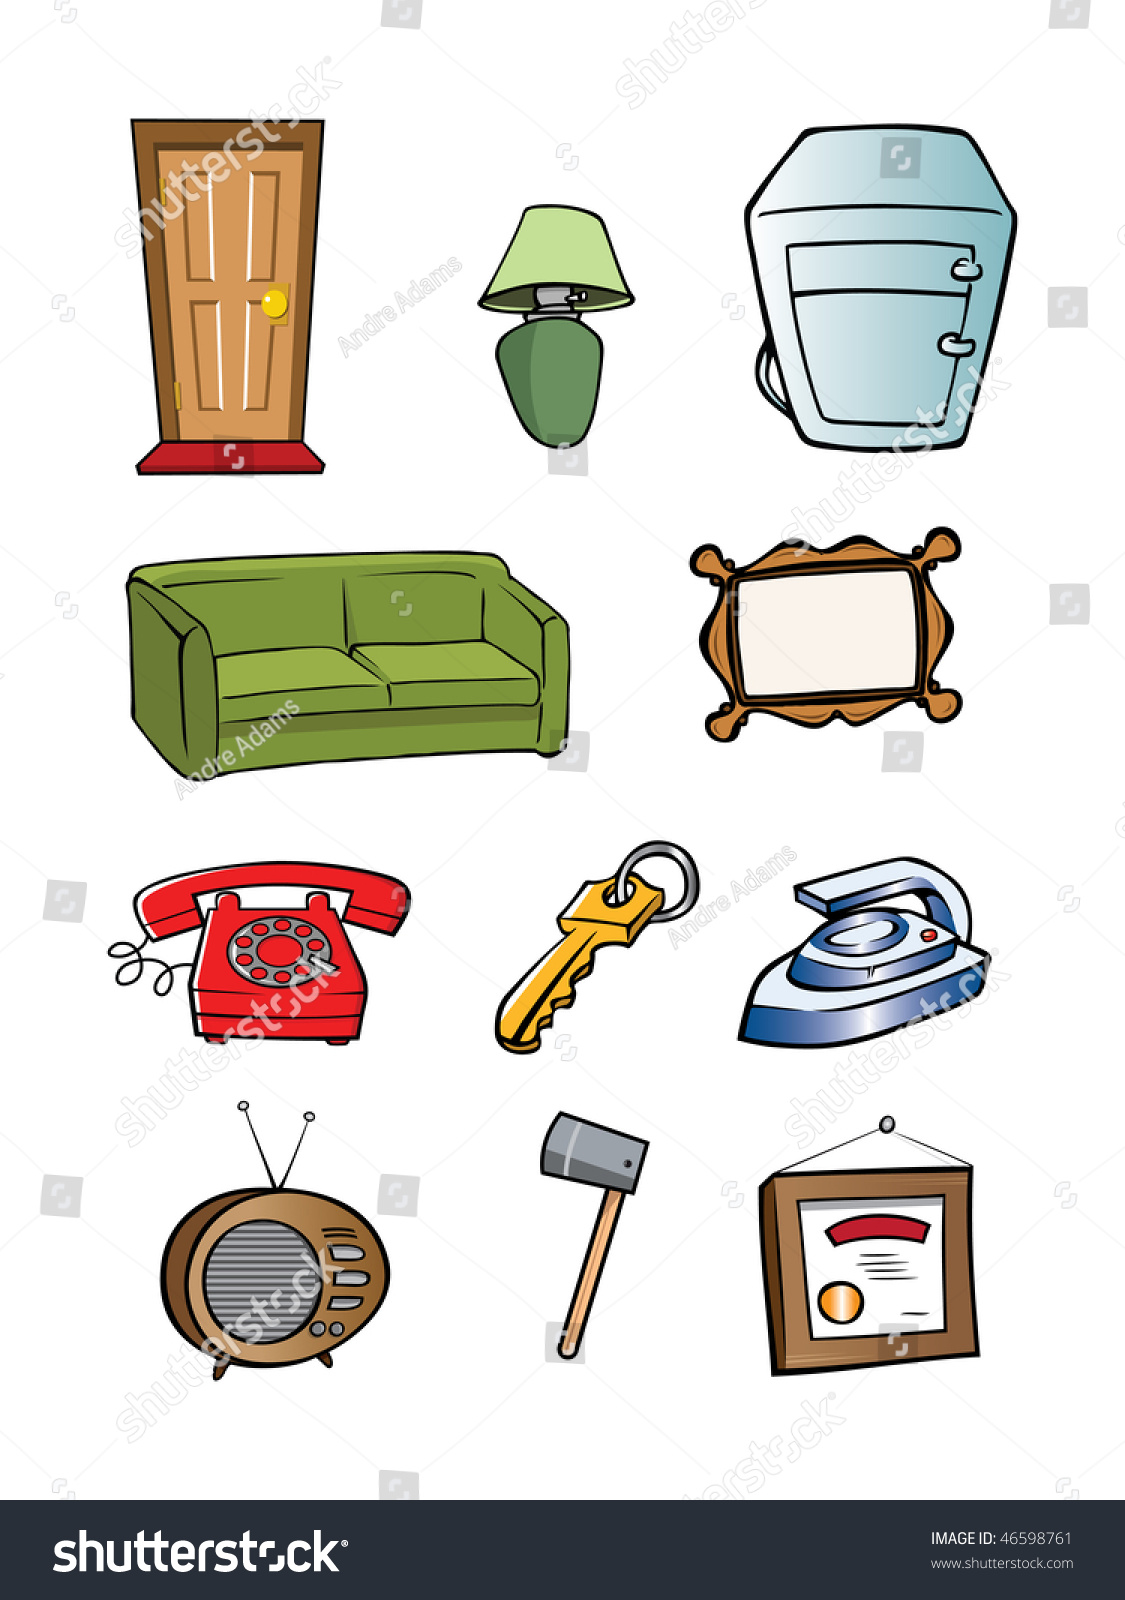 clip art everyday objects - photo #9